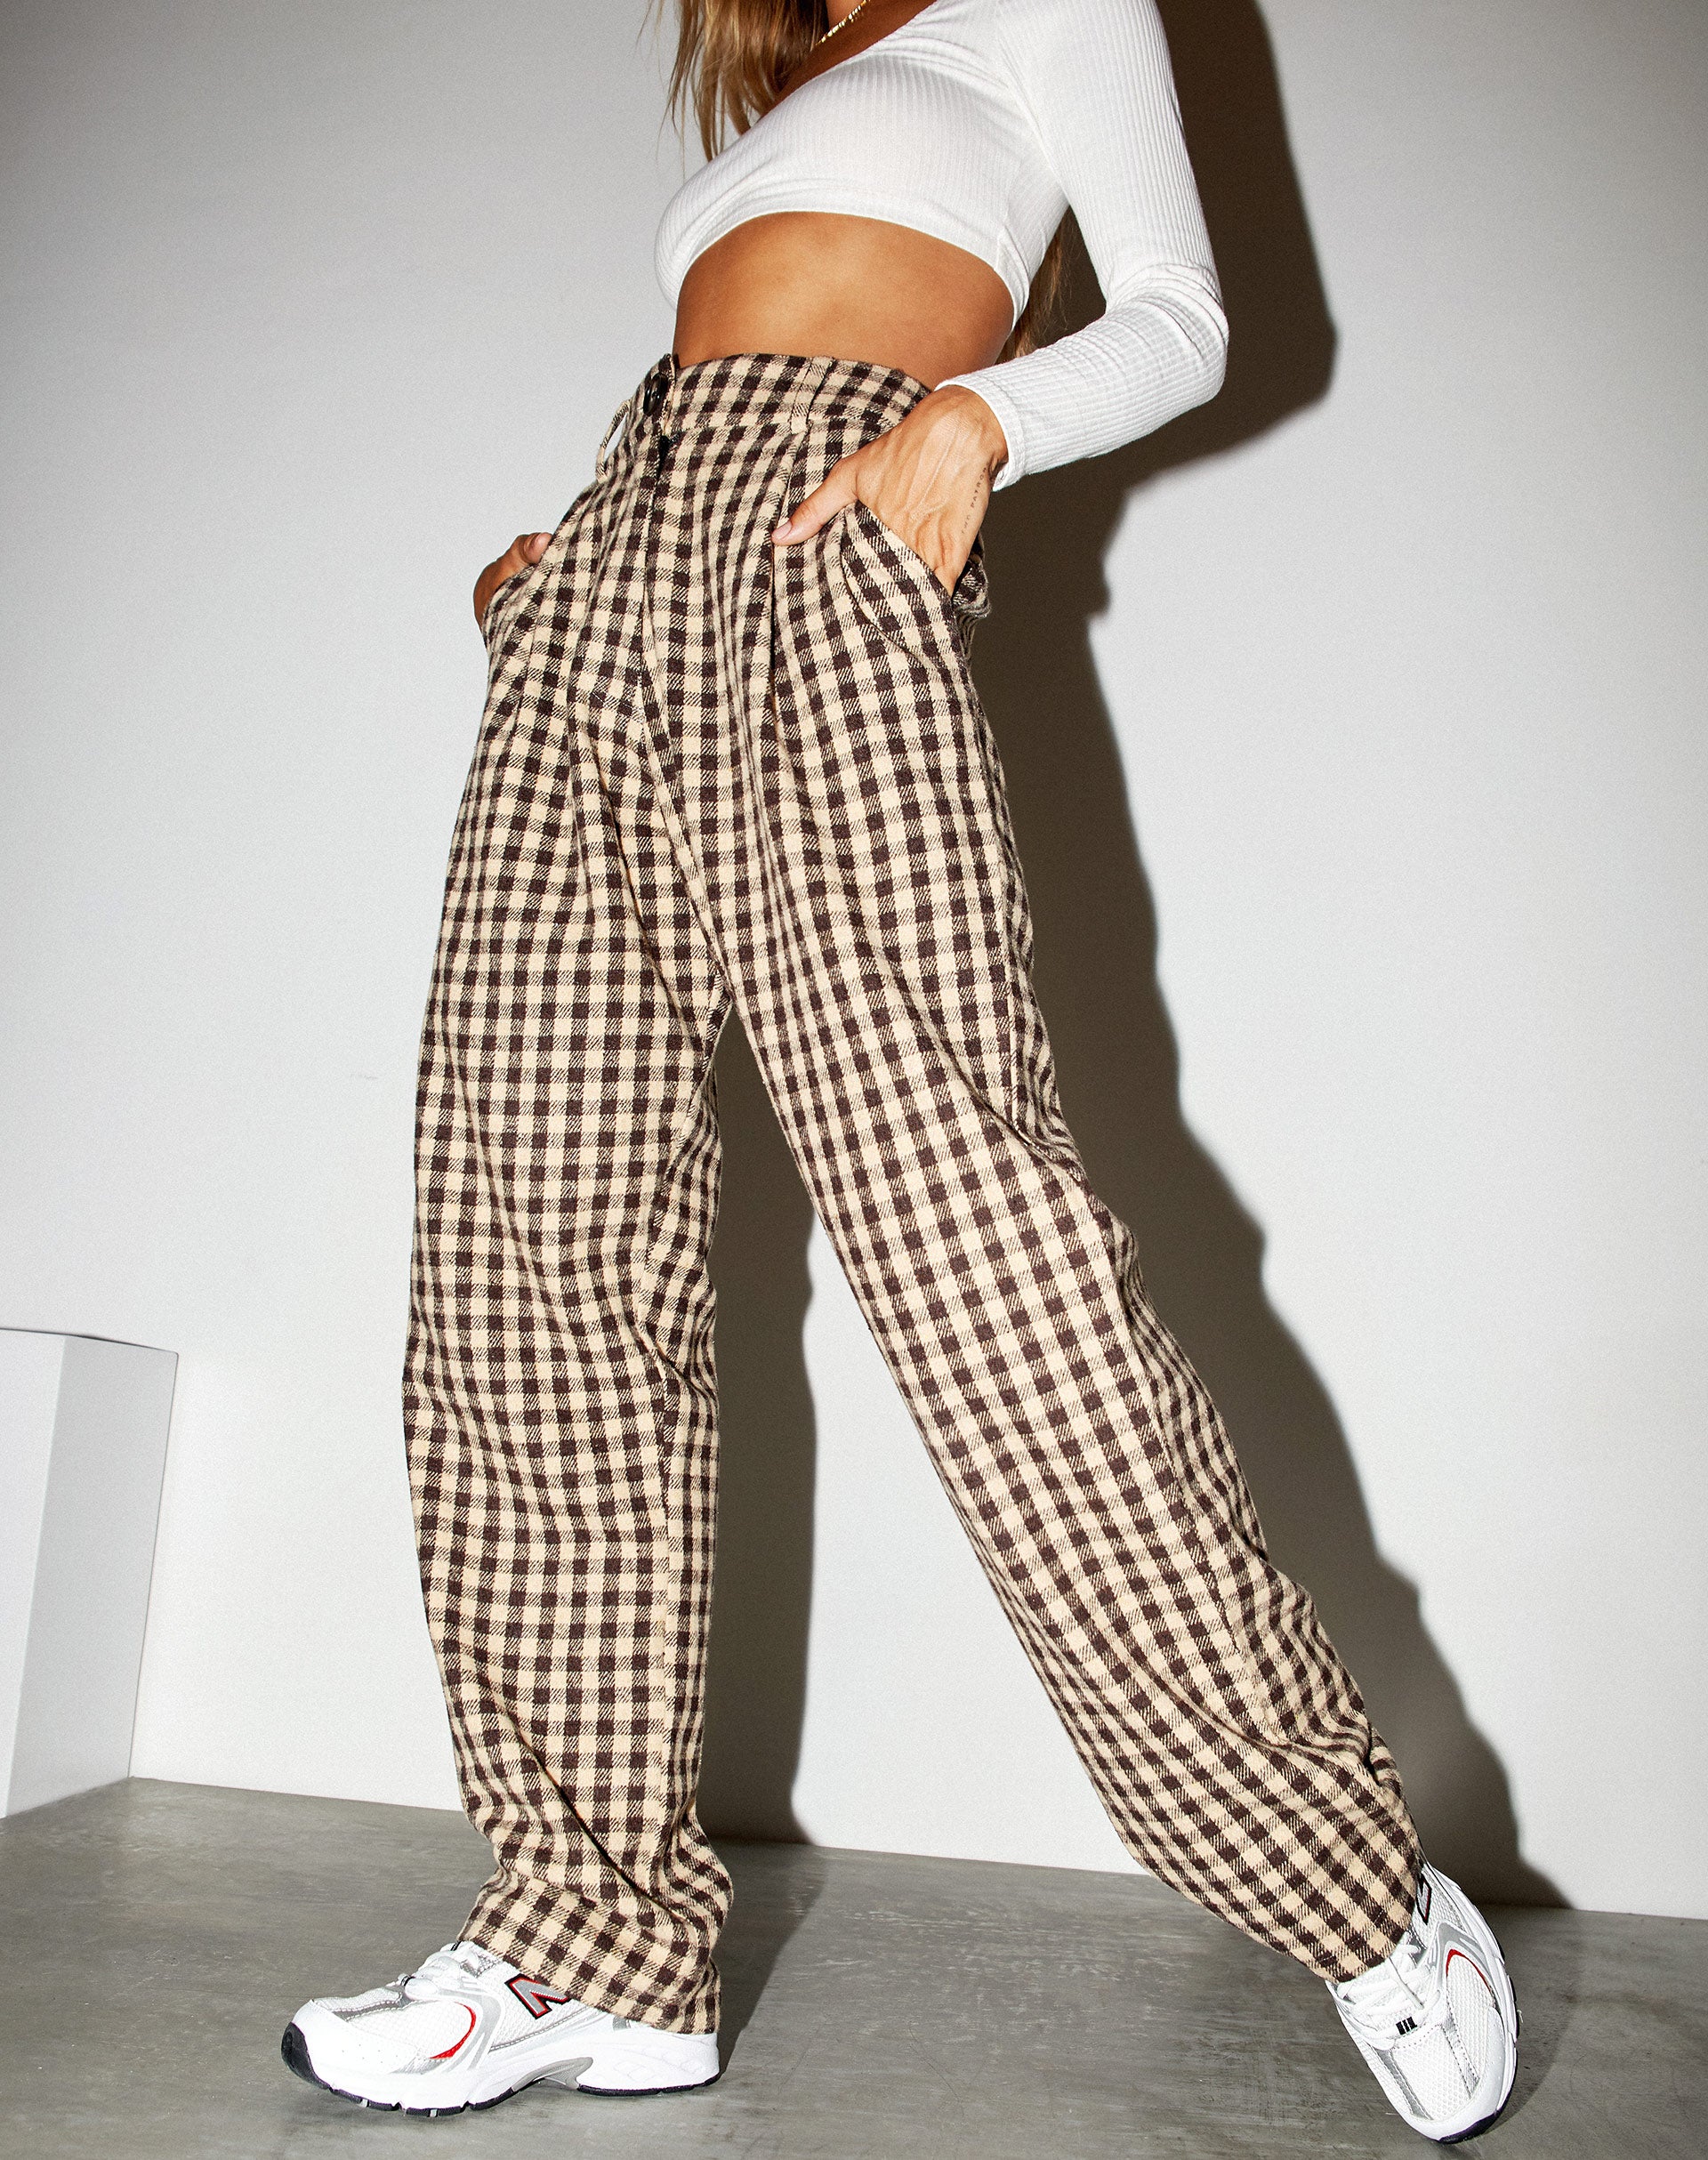 Image of Sakila Trouser in Gingham Tan and Black